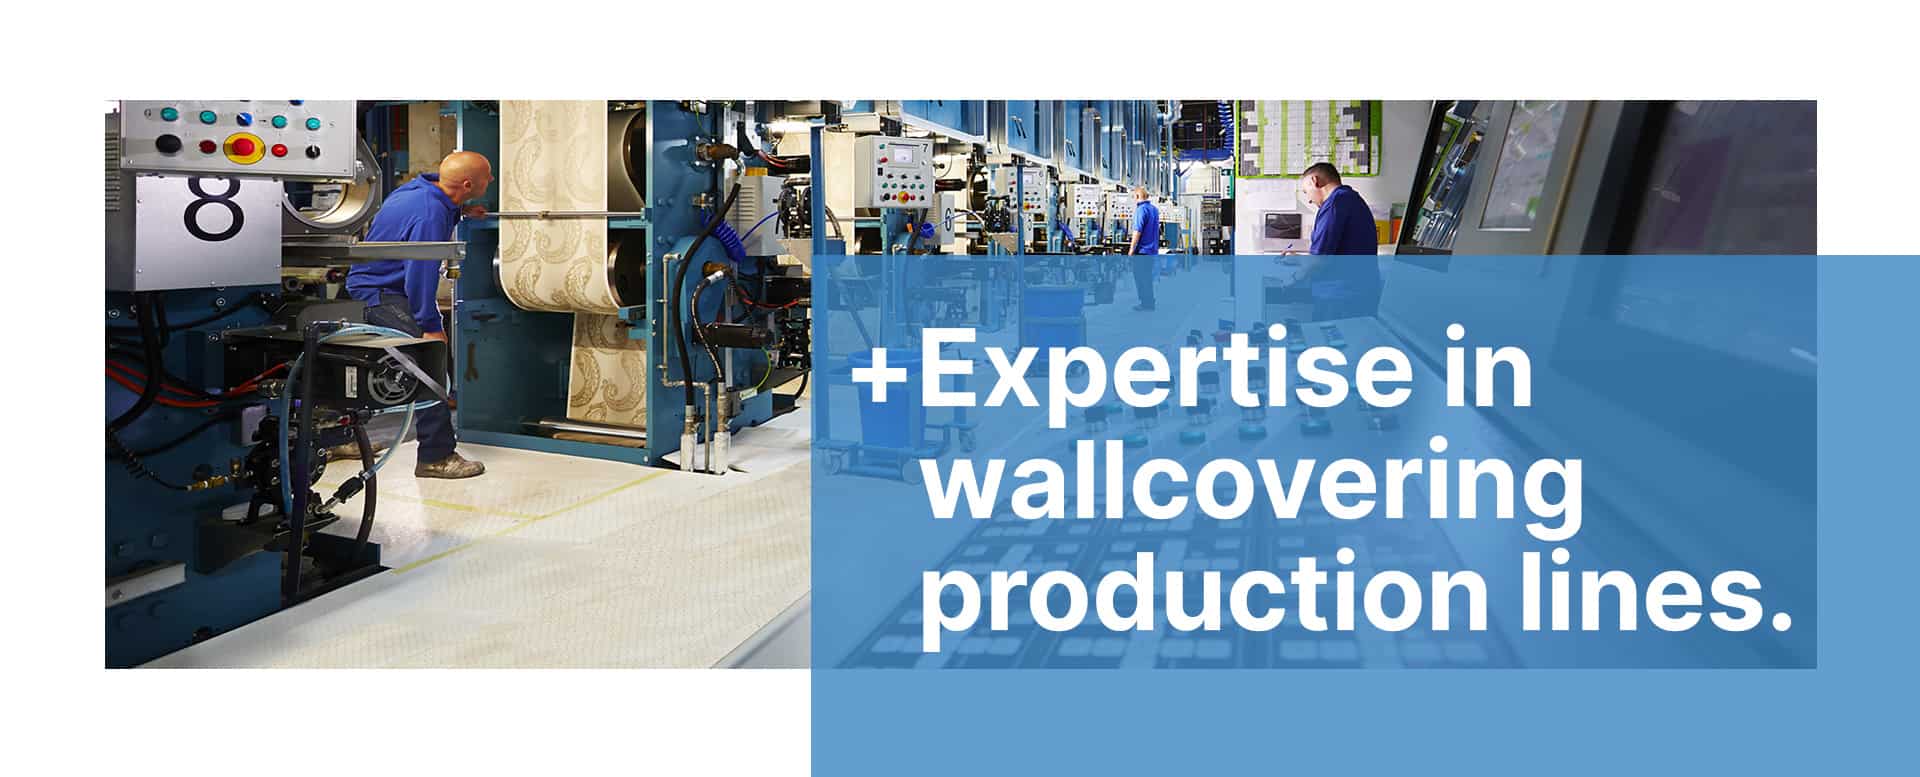 Print - Expertise in wallcovering production lines.